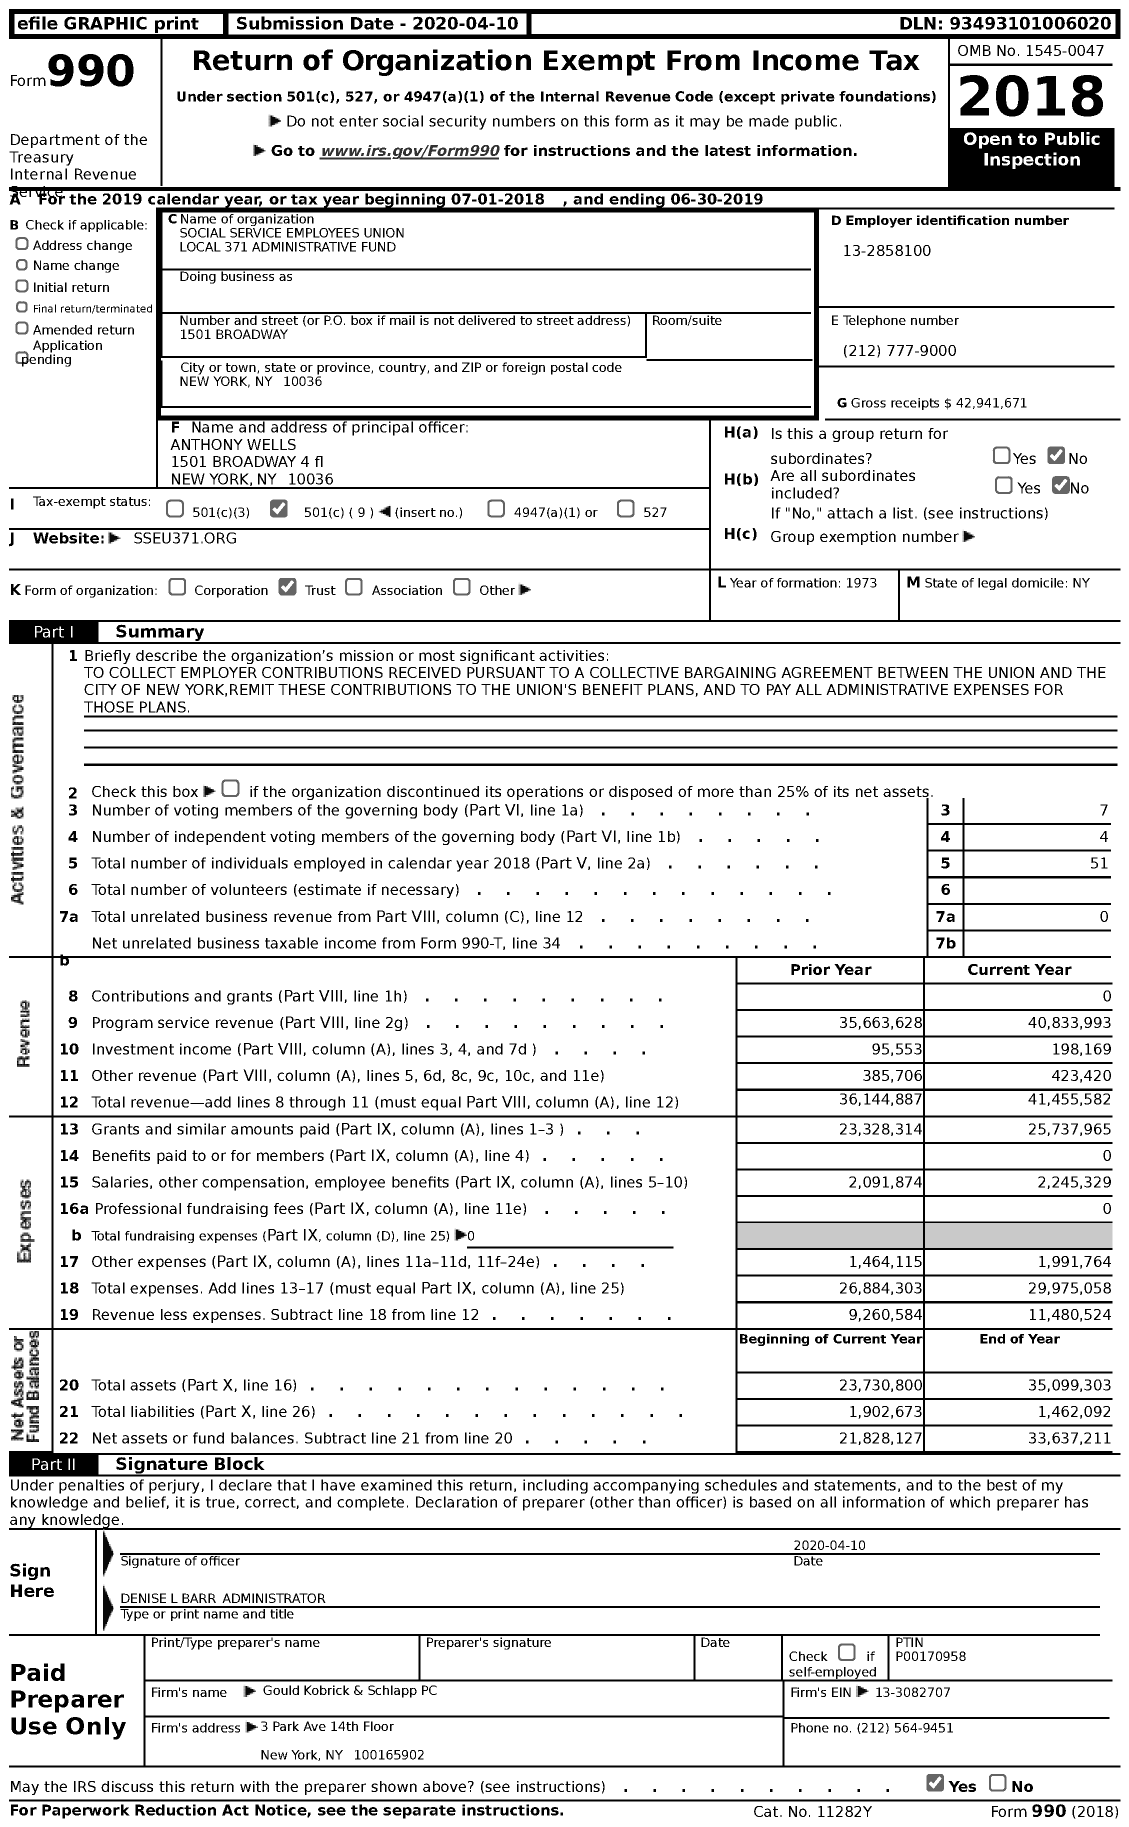 Image of first page of 2018 Form 990 for Social Service Employees Union Local 371 Administrative Fund